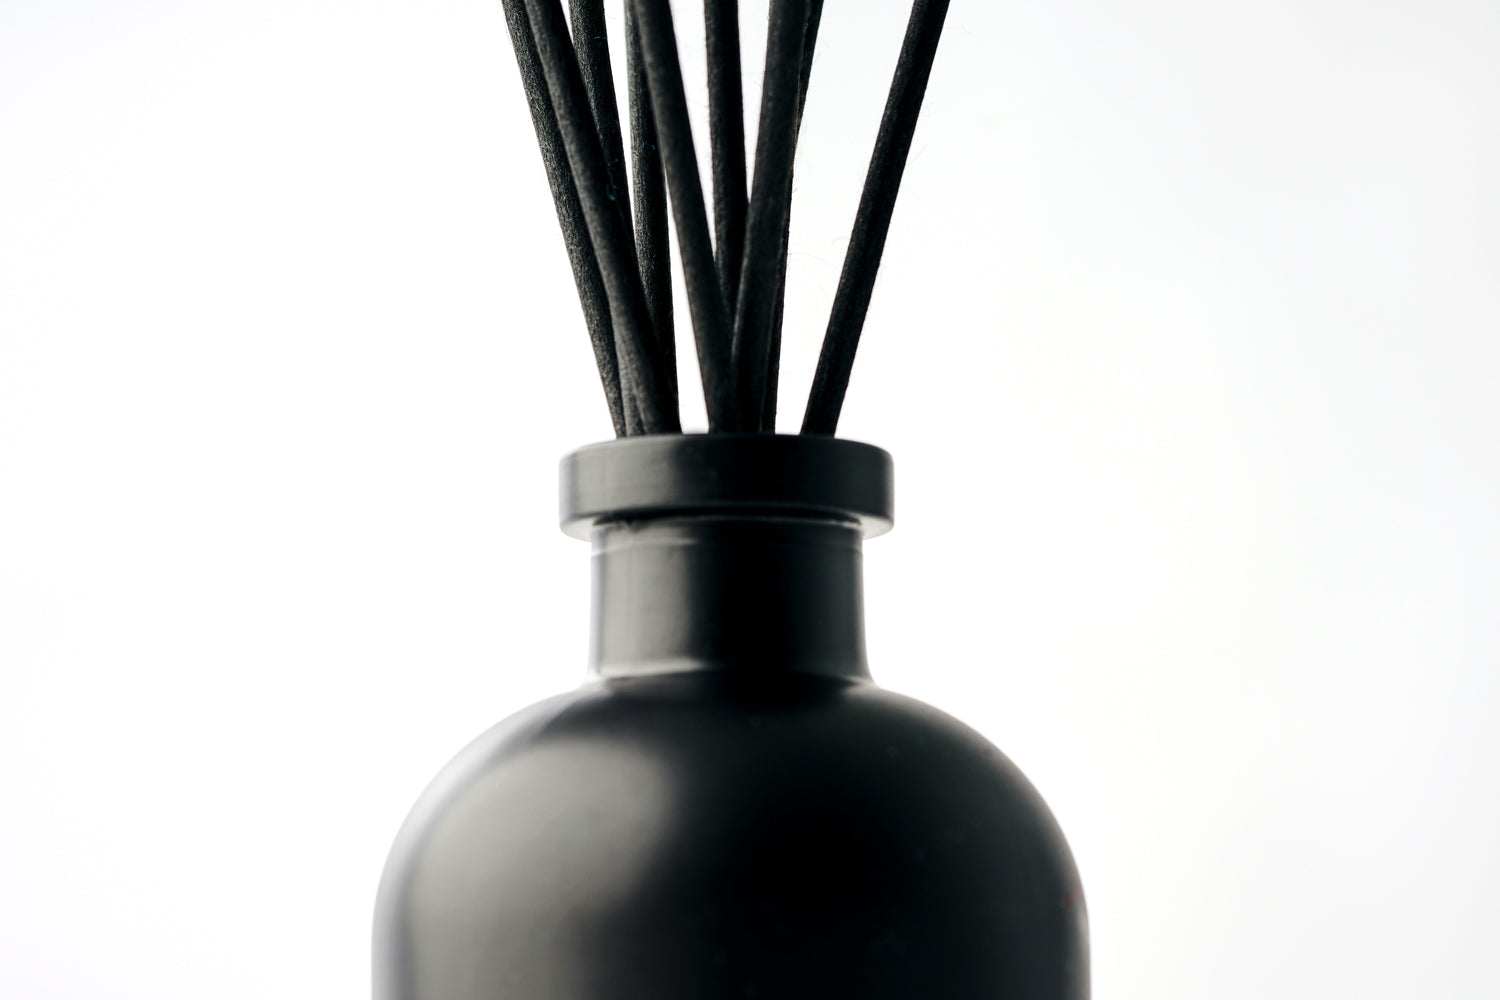 LUXURY NATURAL REED DIFFUSER - HIBISCUS AMBER - Hadobody